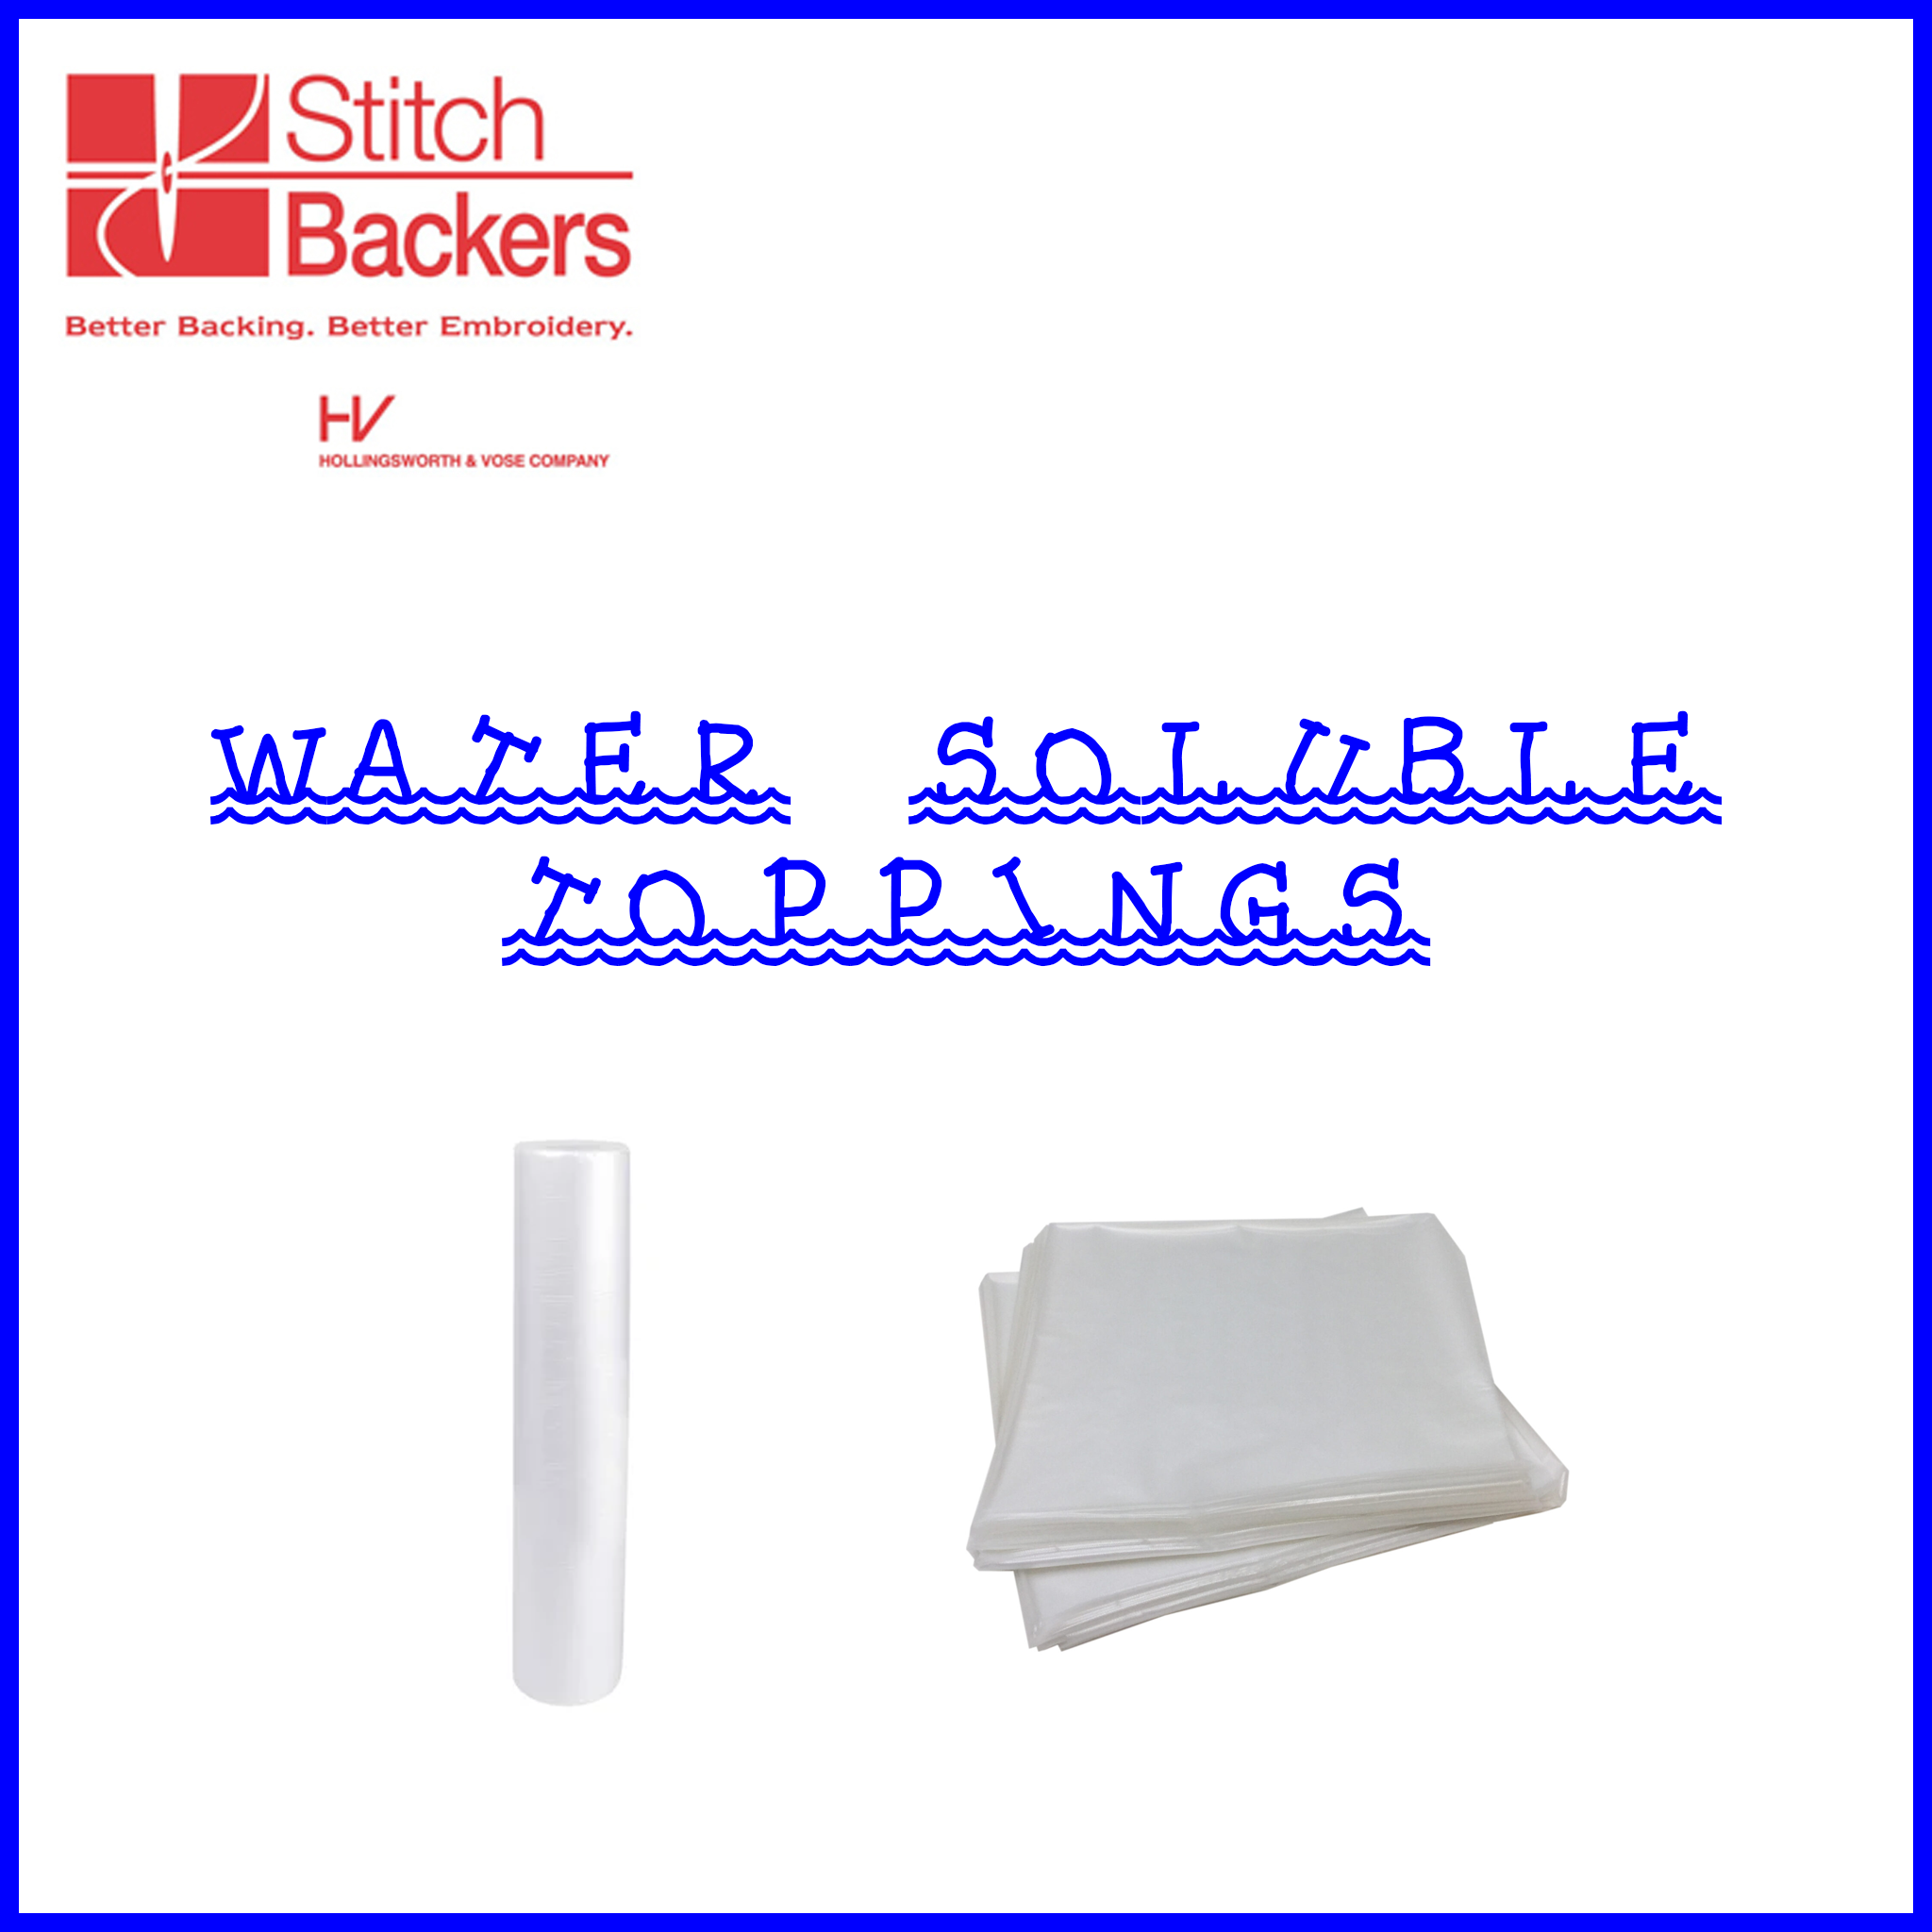 PVA Water Soluble Topping